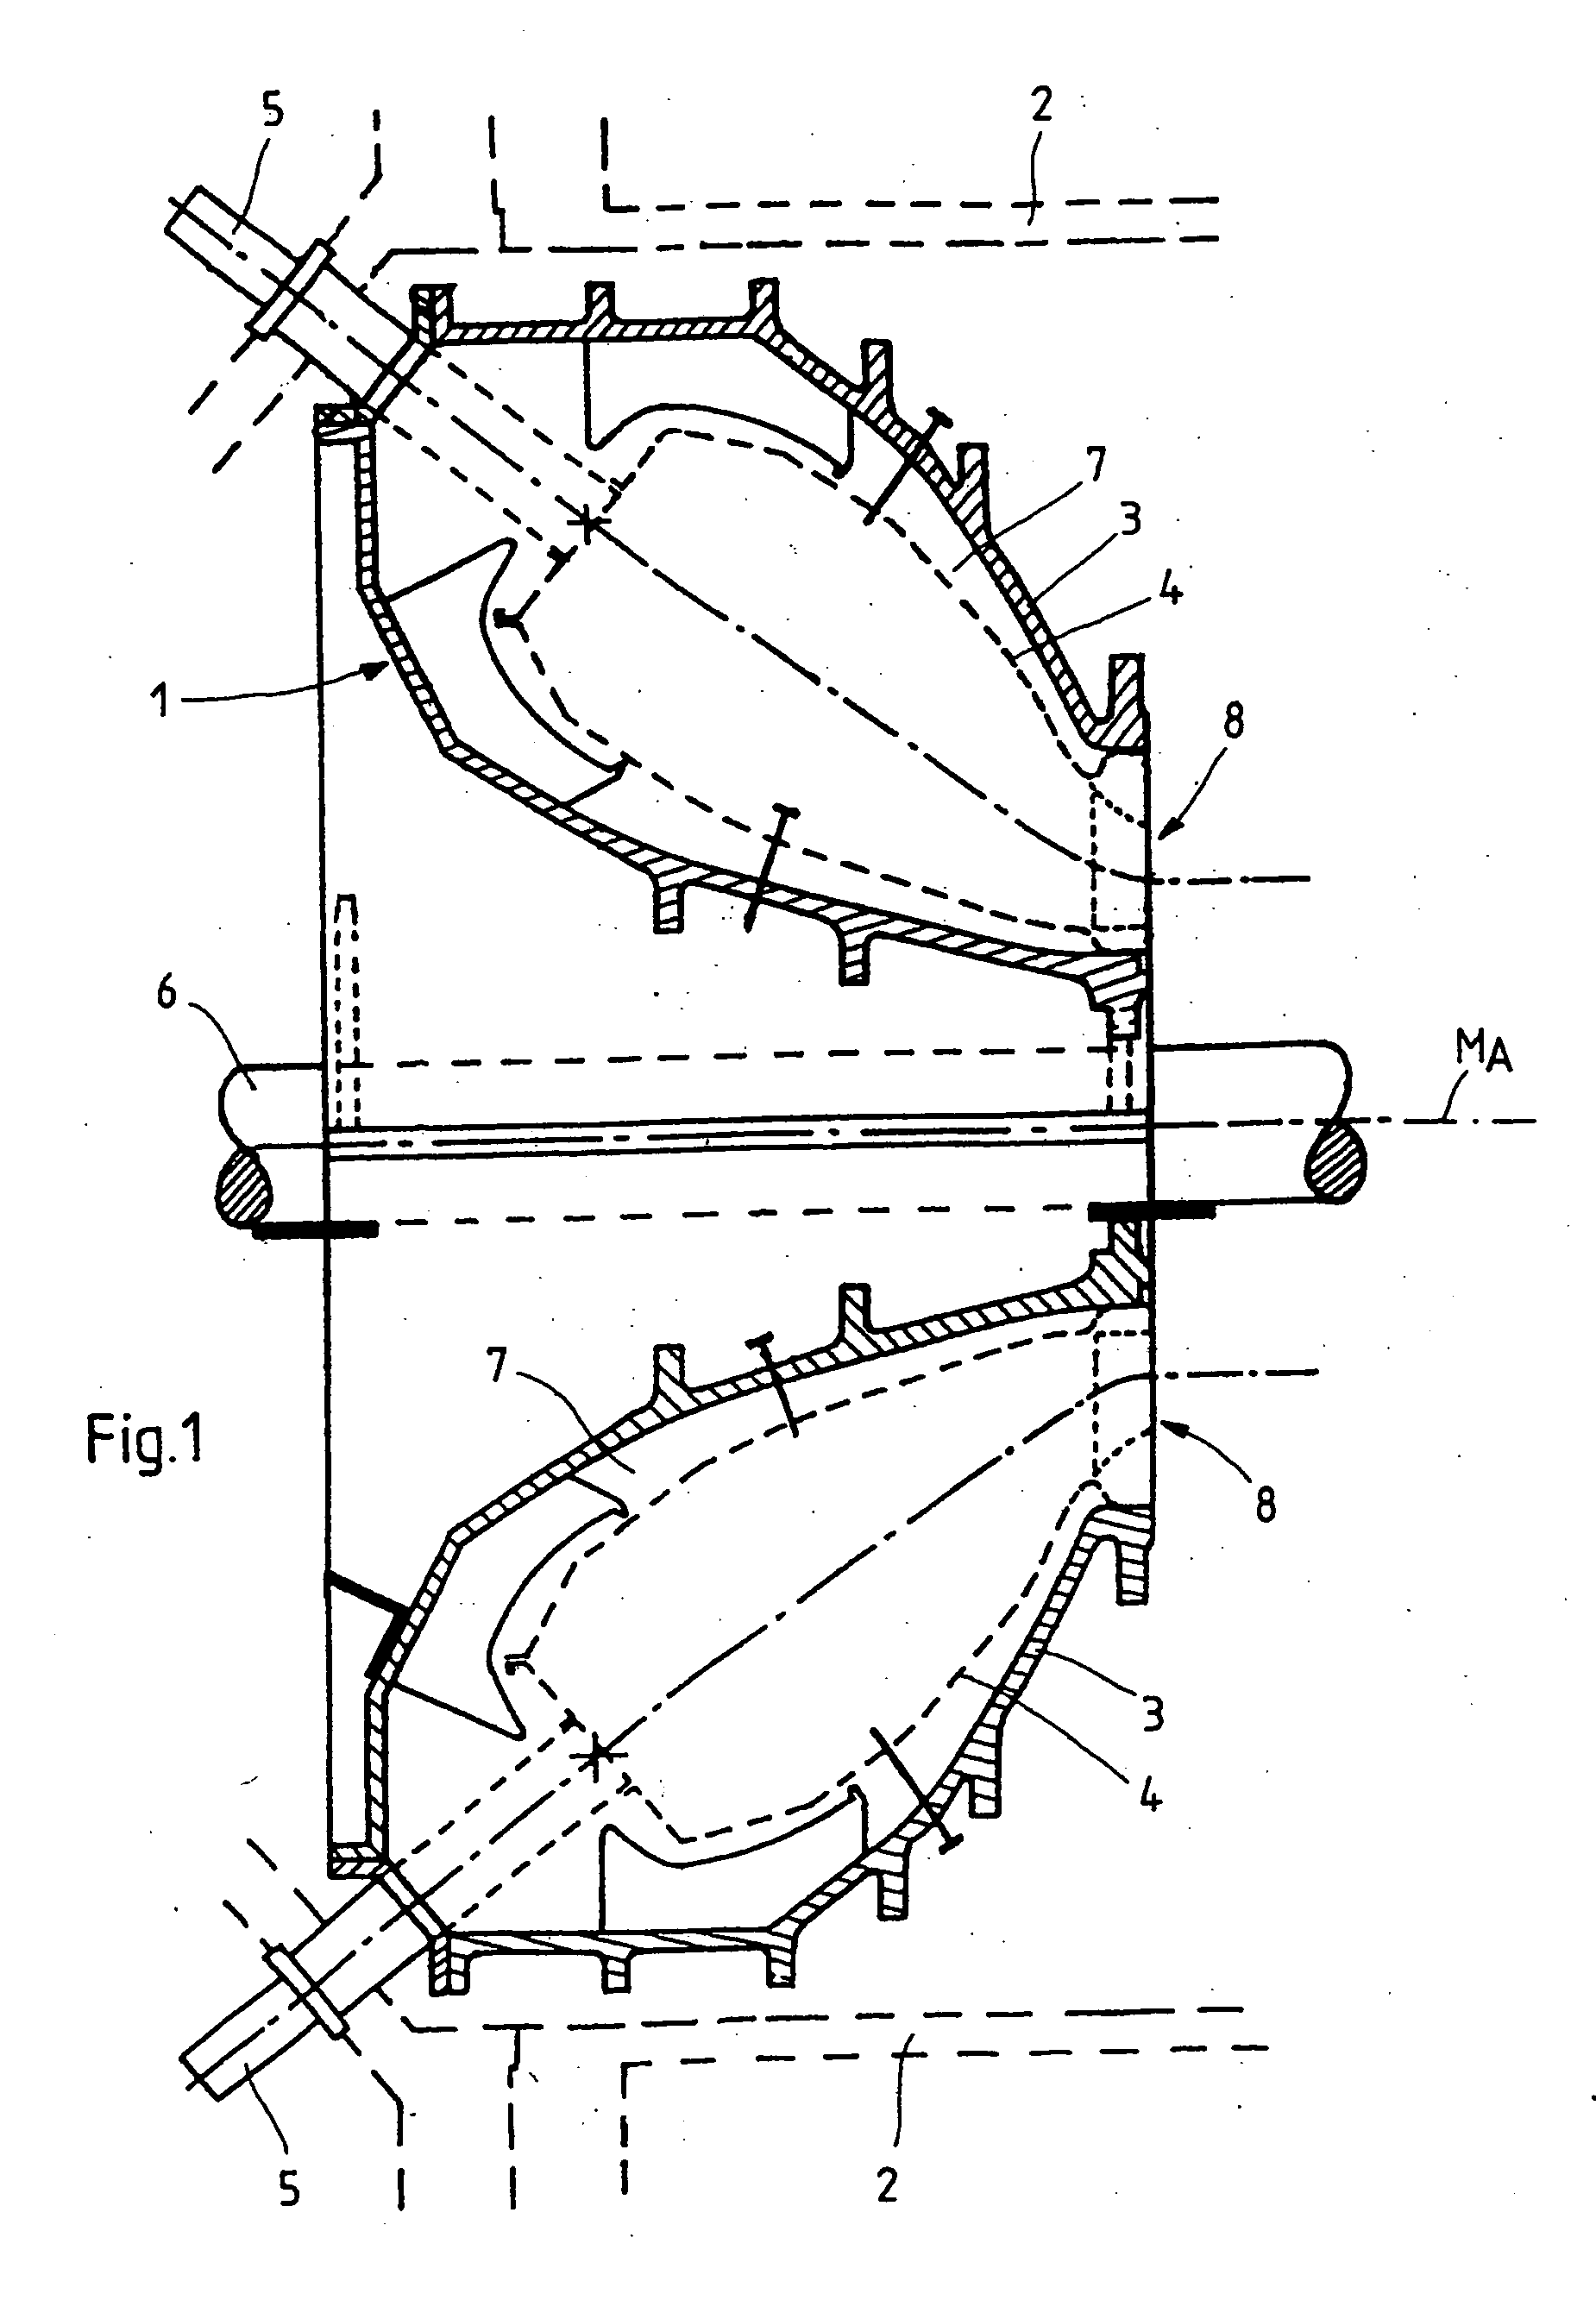 Annular combustion chamber for a gas turbine